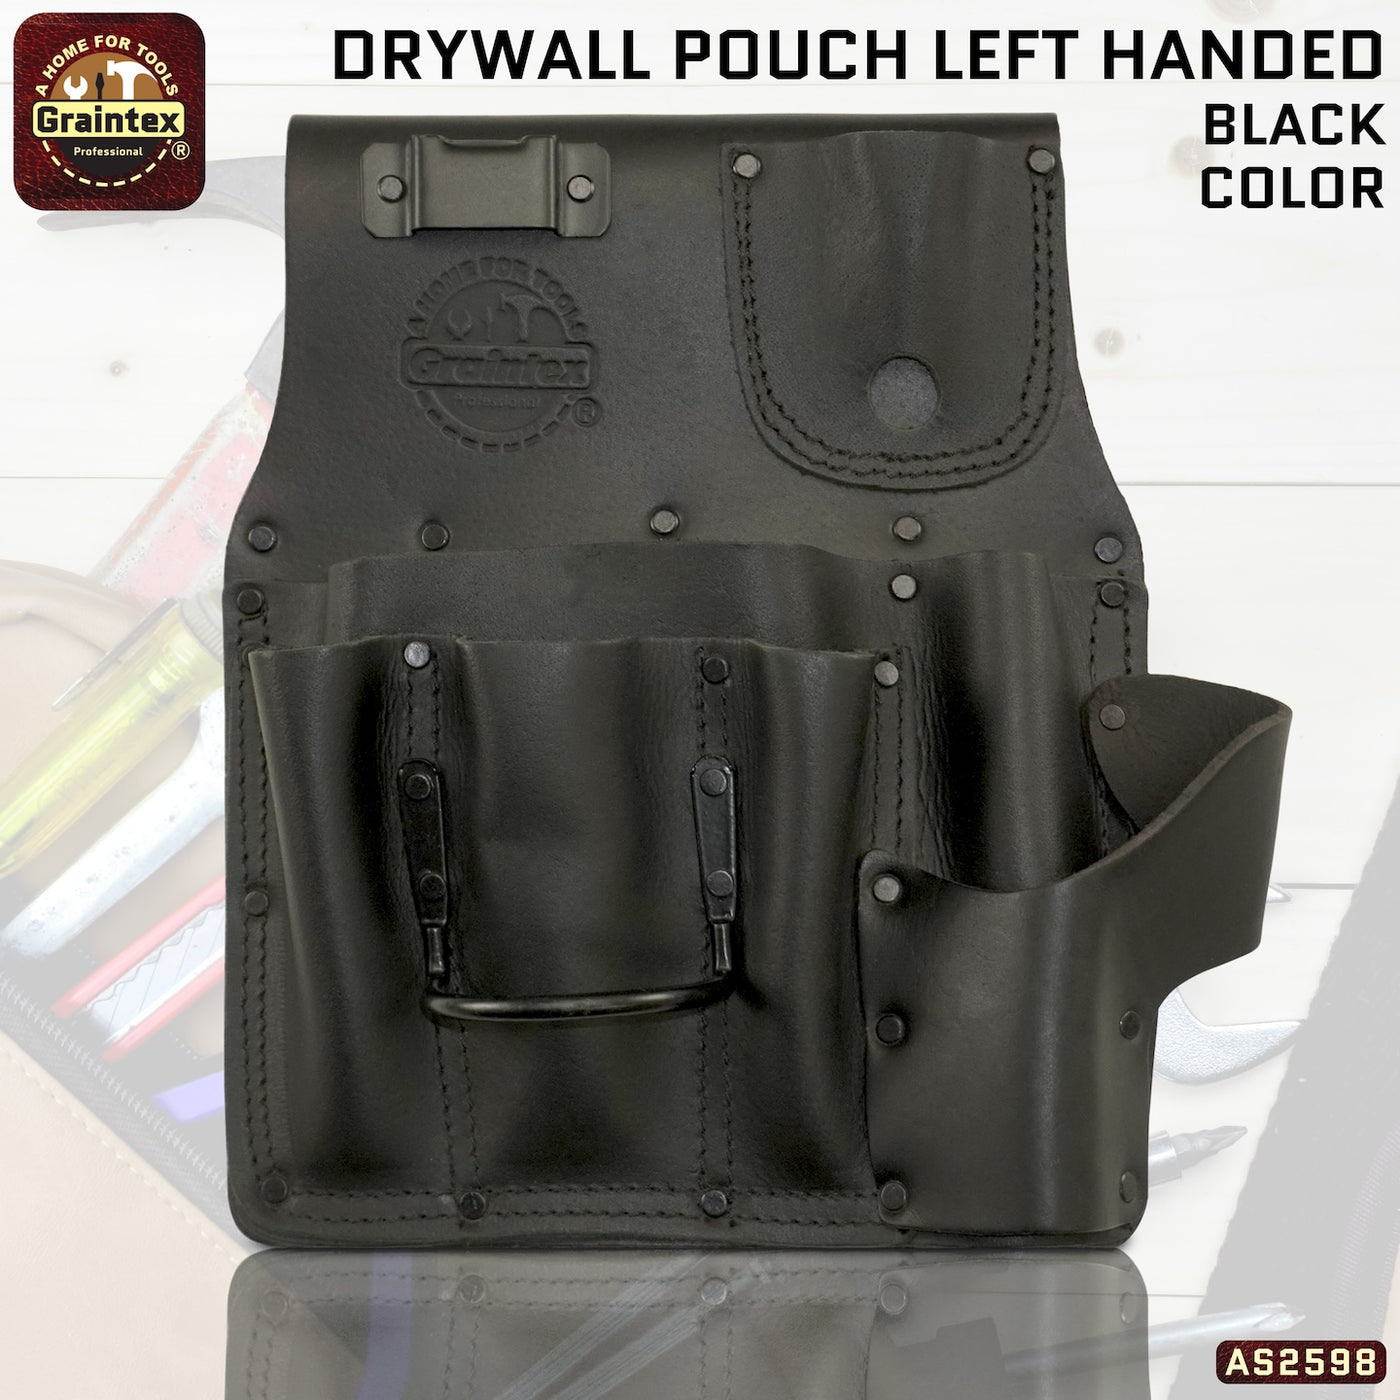 AS2598 :: Drywall Pouch Left Handed Ambassador Series Black Color Top Grain Leather